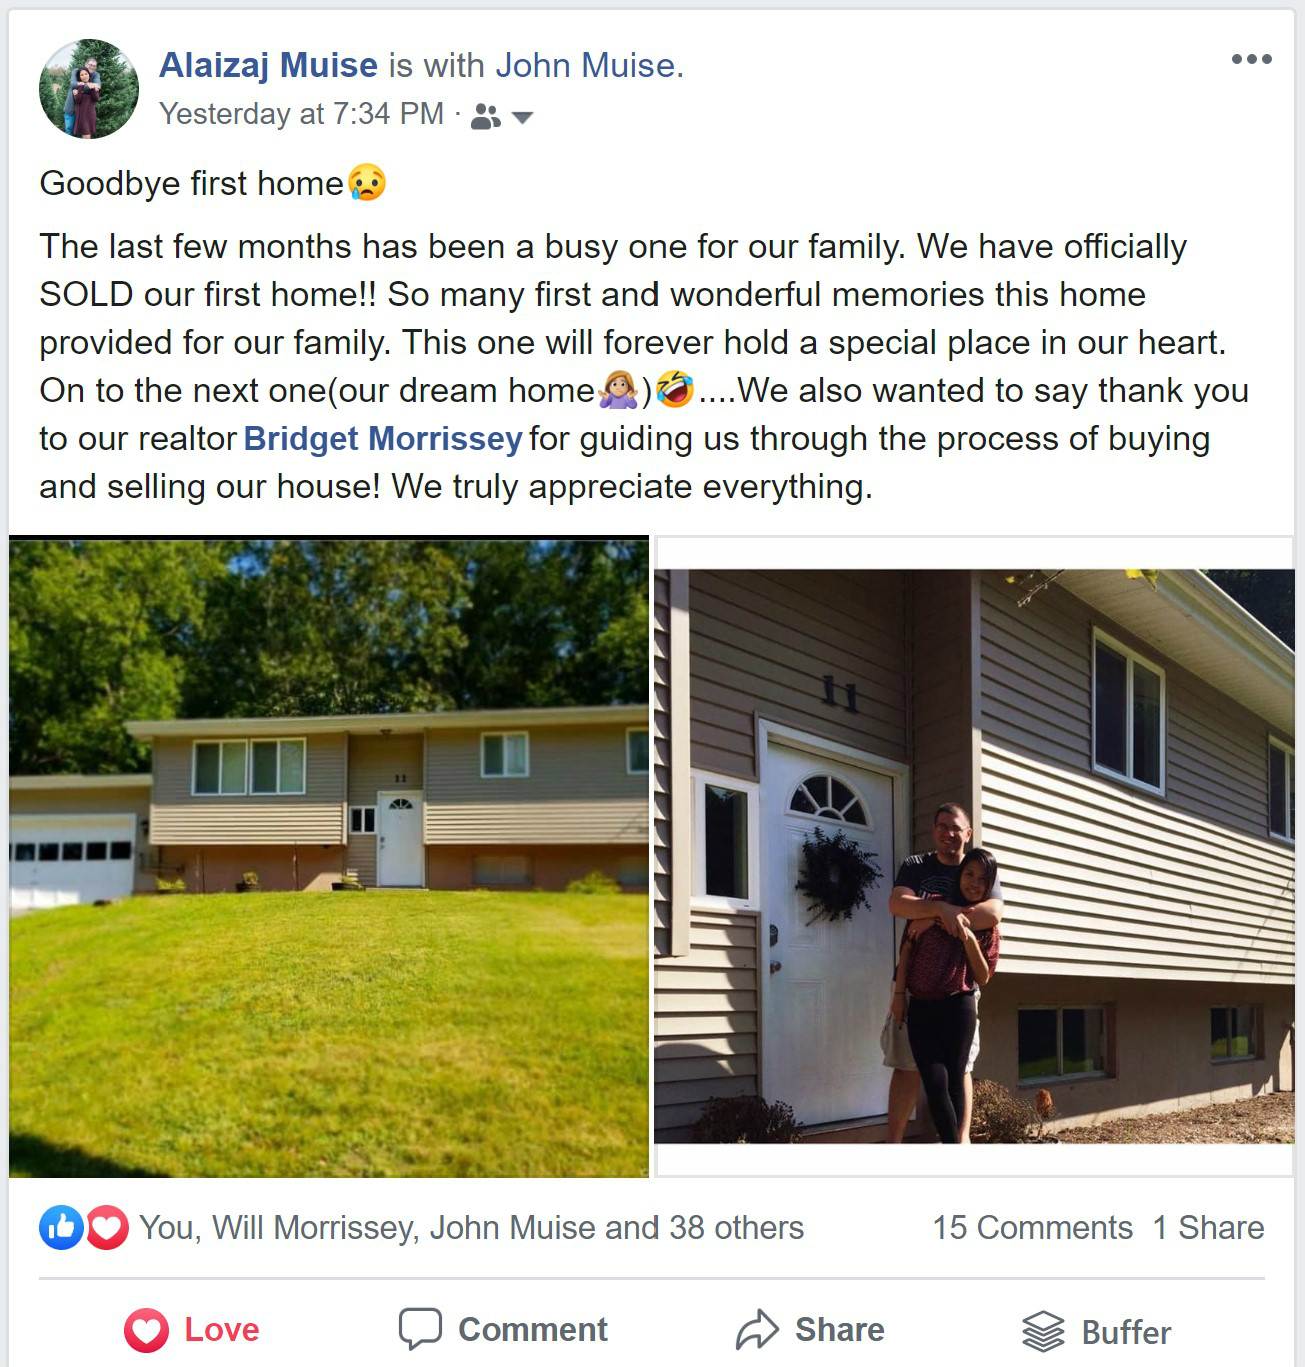 Thank you to our realtor Bridget Morrissey for guiding us through the process of buying and selling our house! We truly appreciate everything.